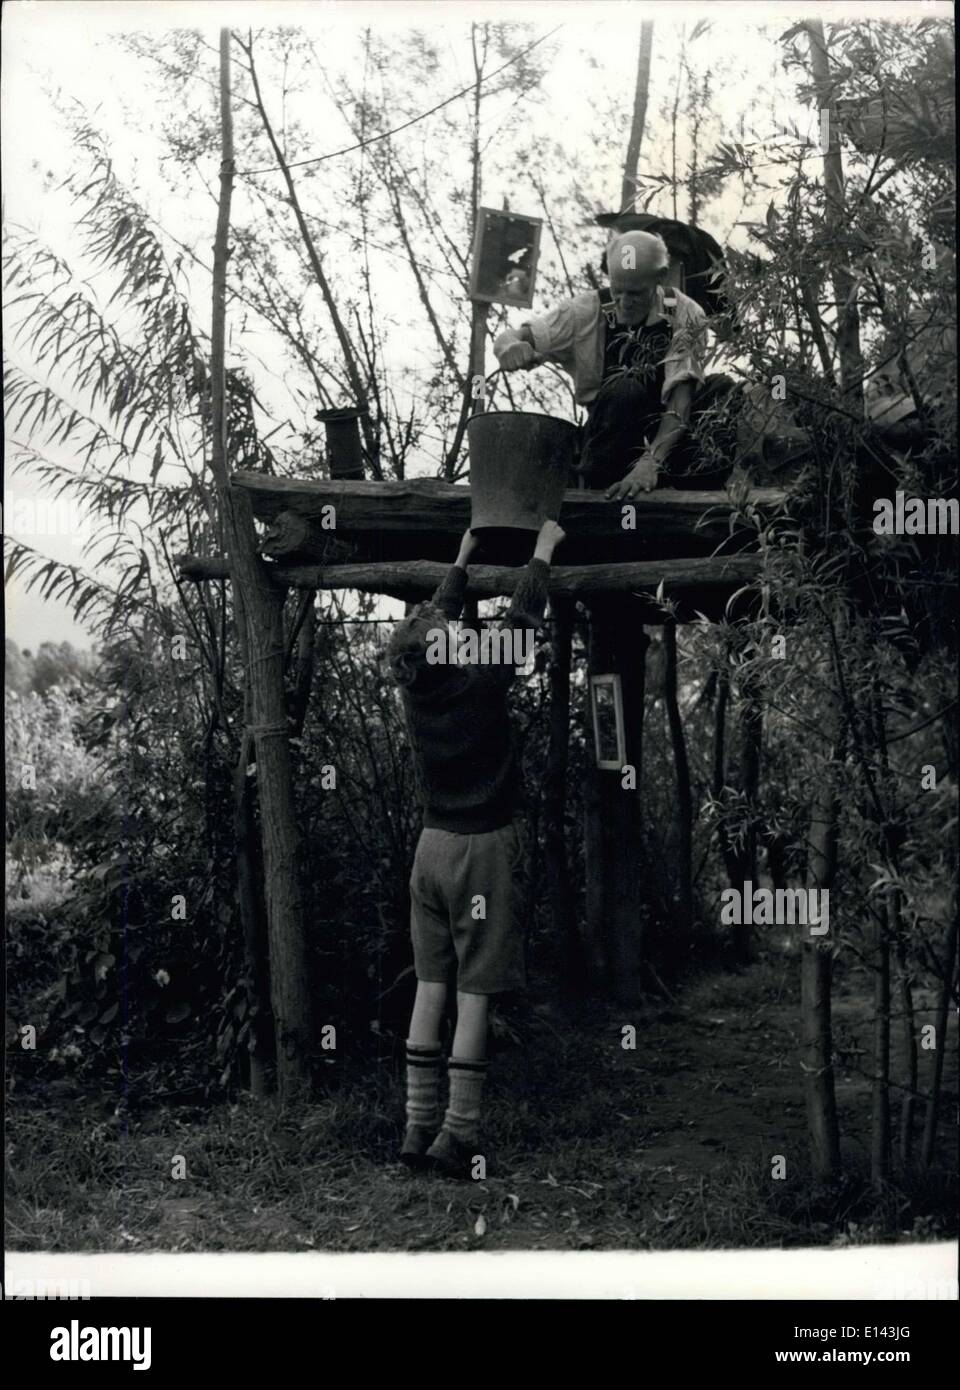 Apr. 04, 2012 - The Man who lives in the Trees: Frank Gunnell sometimes gets a hand from his y nephew Harold, when he comes Stock Photo